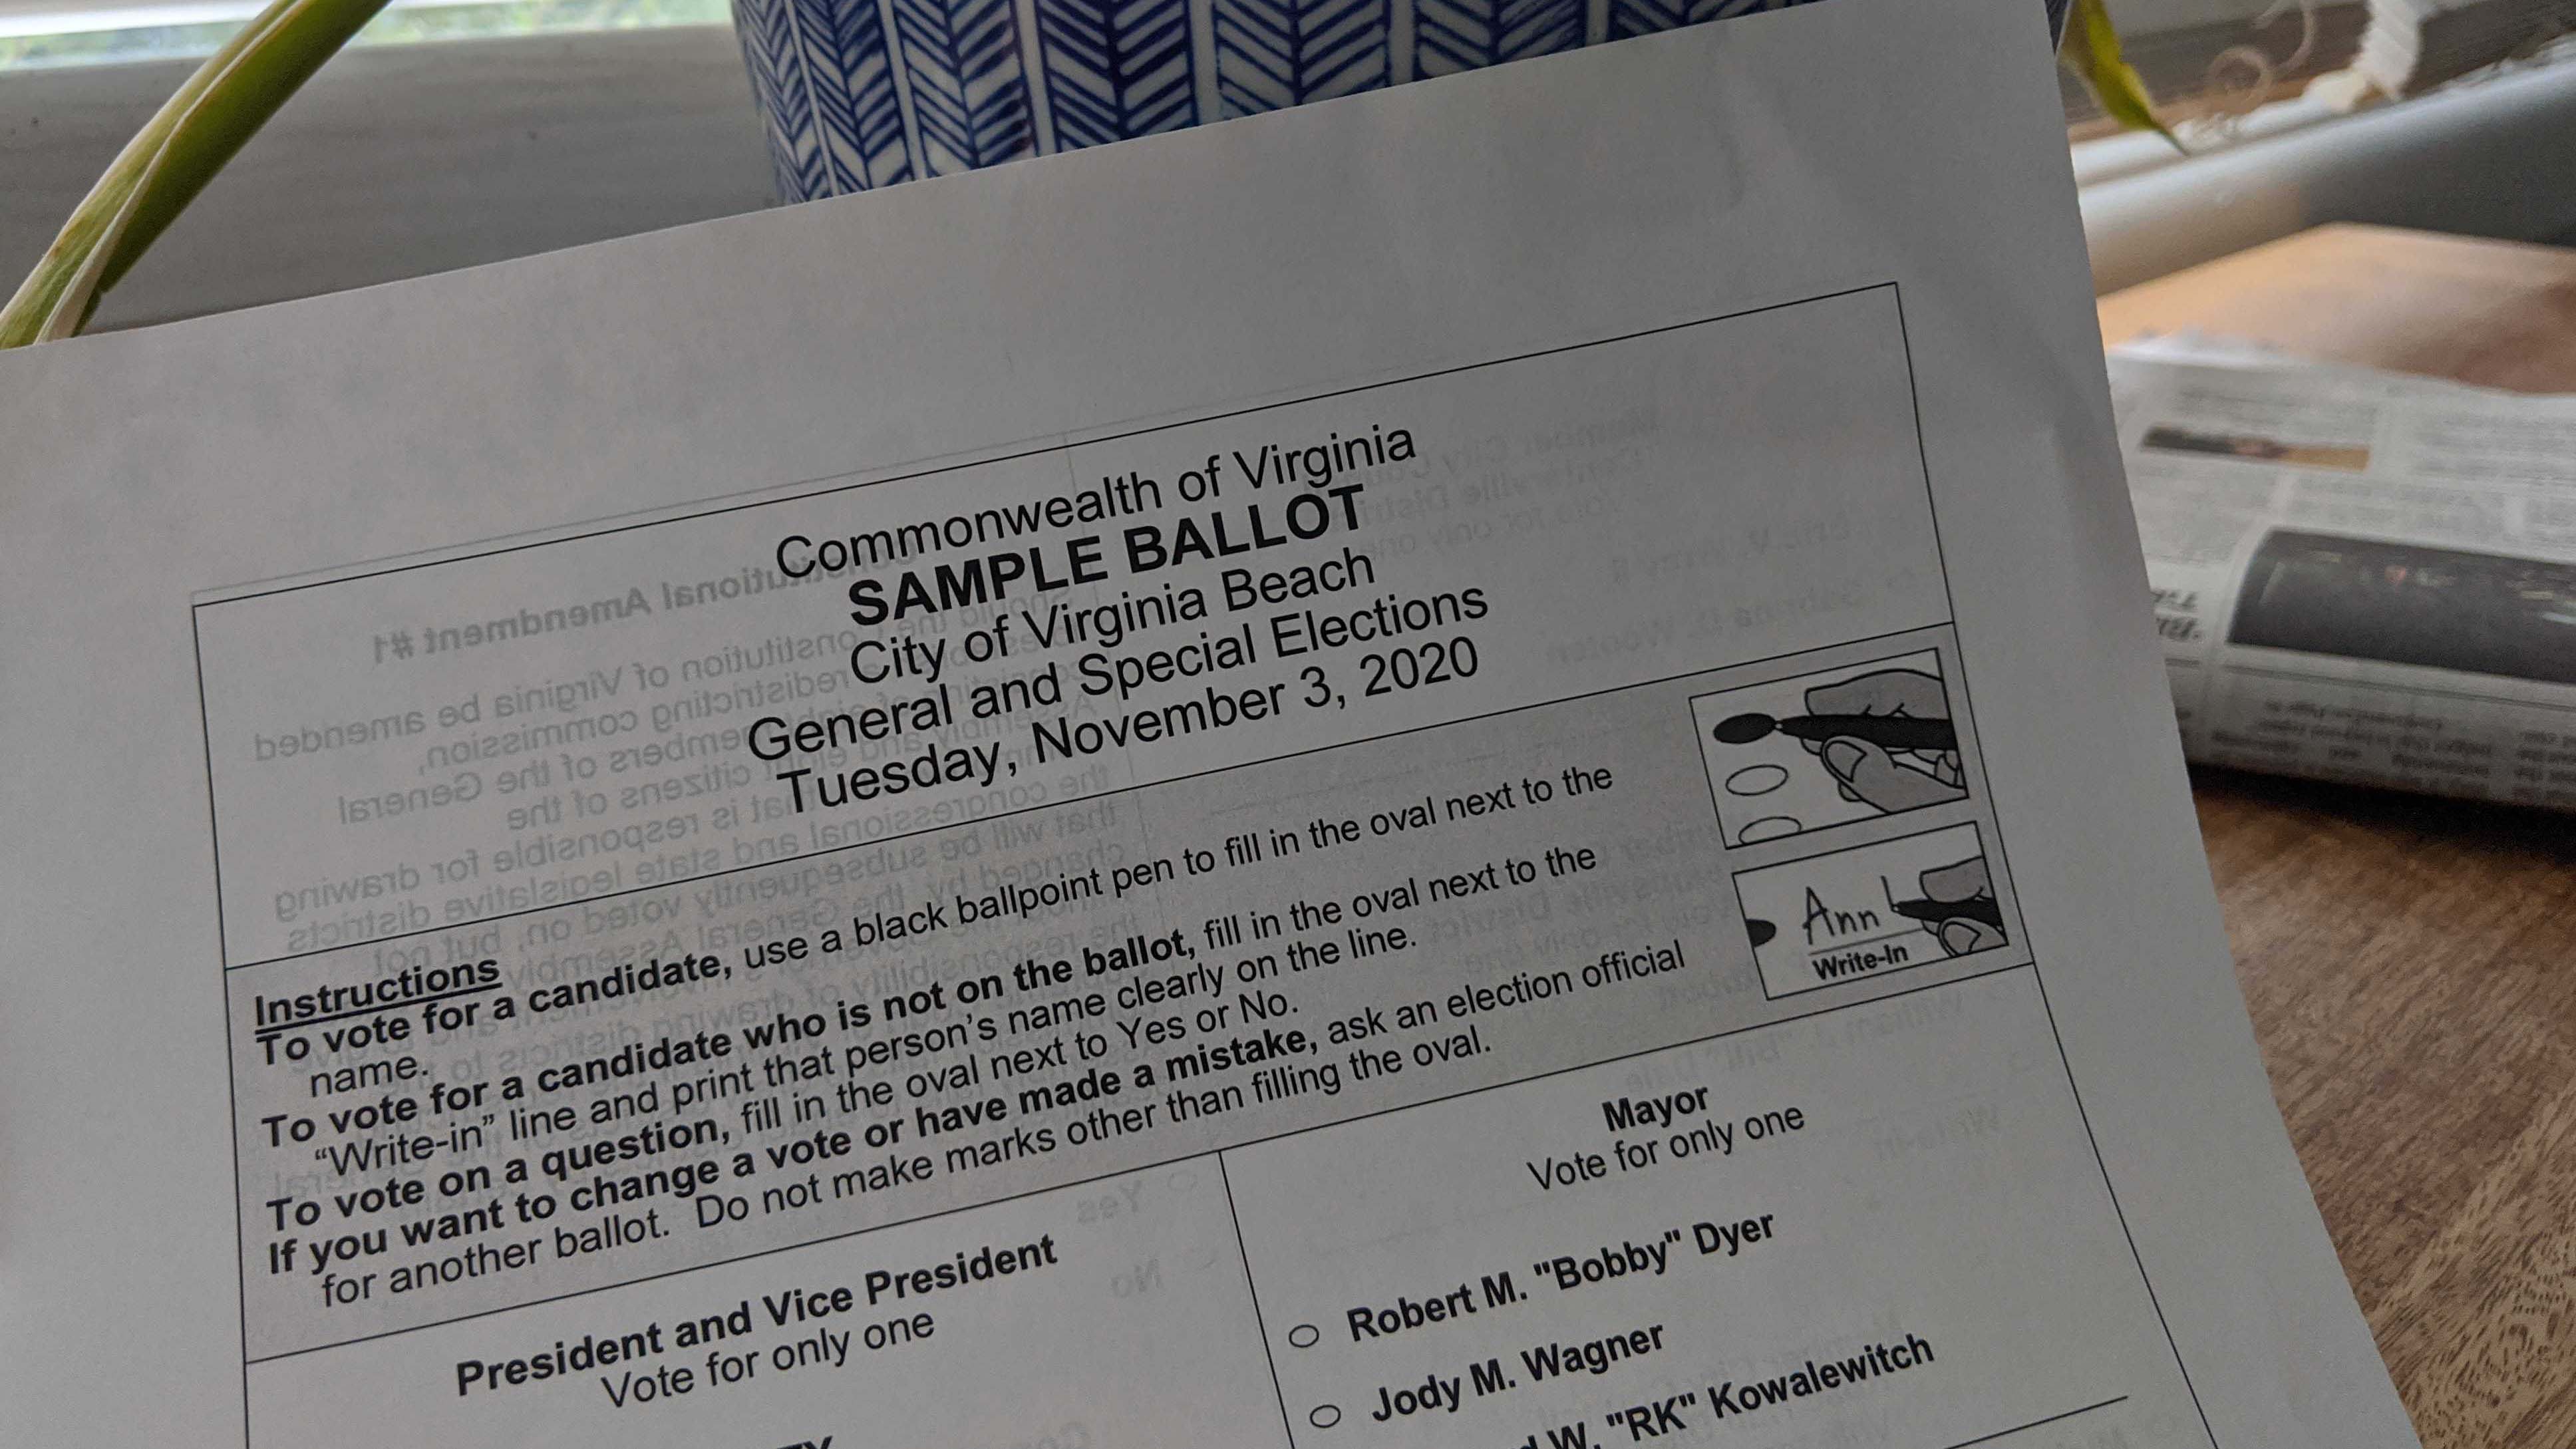 Photo by Rebecca Feldhaus Adams, WHRO. Voters in Virginia are not required to have a witness to their mail-in ballot. But, voters do have to provide their own signature.